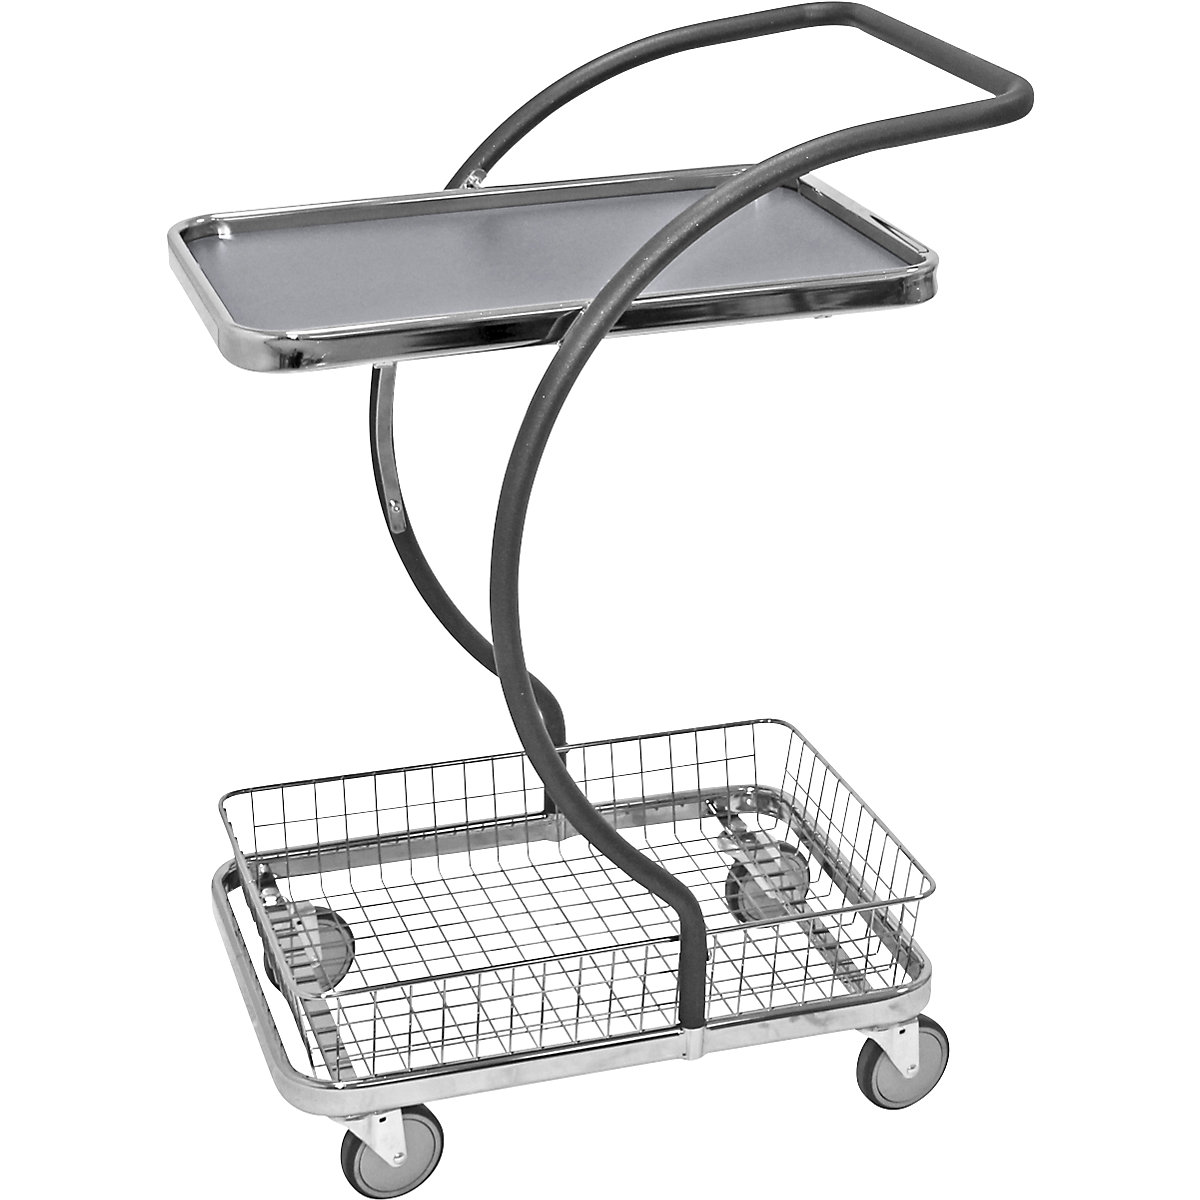 C-LINE shopping and table trolley – Kongamek, with 1 shelf, 1 stainless steel mesh tray, shelf heights 160, 630 mm, 2+ items-7